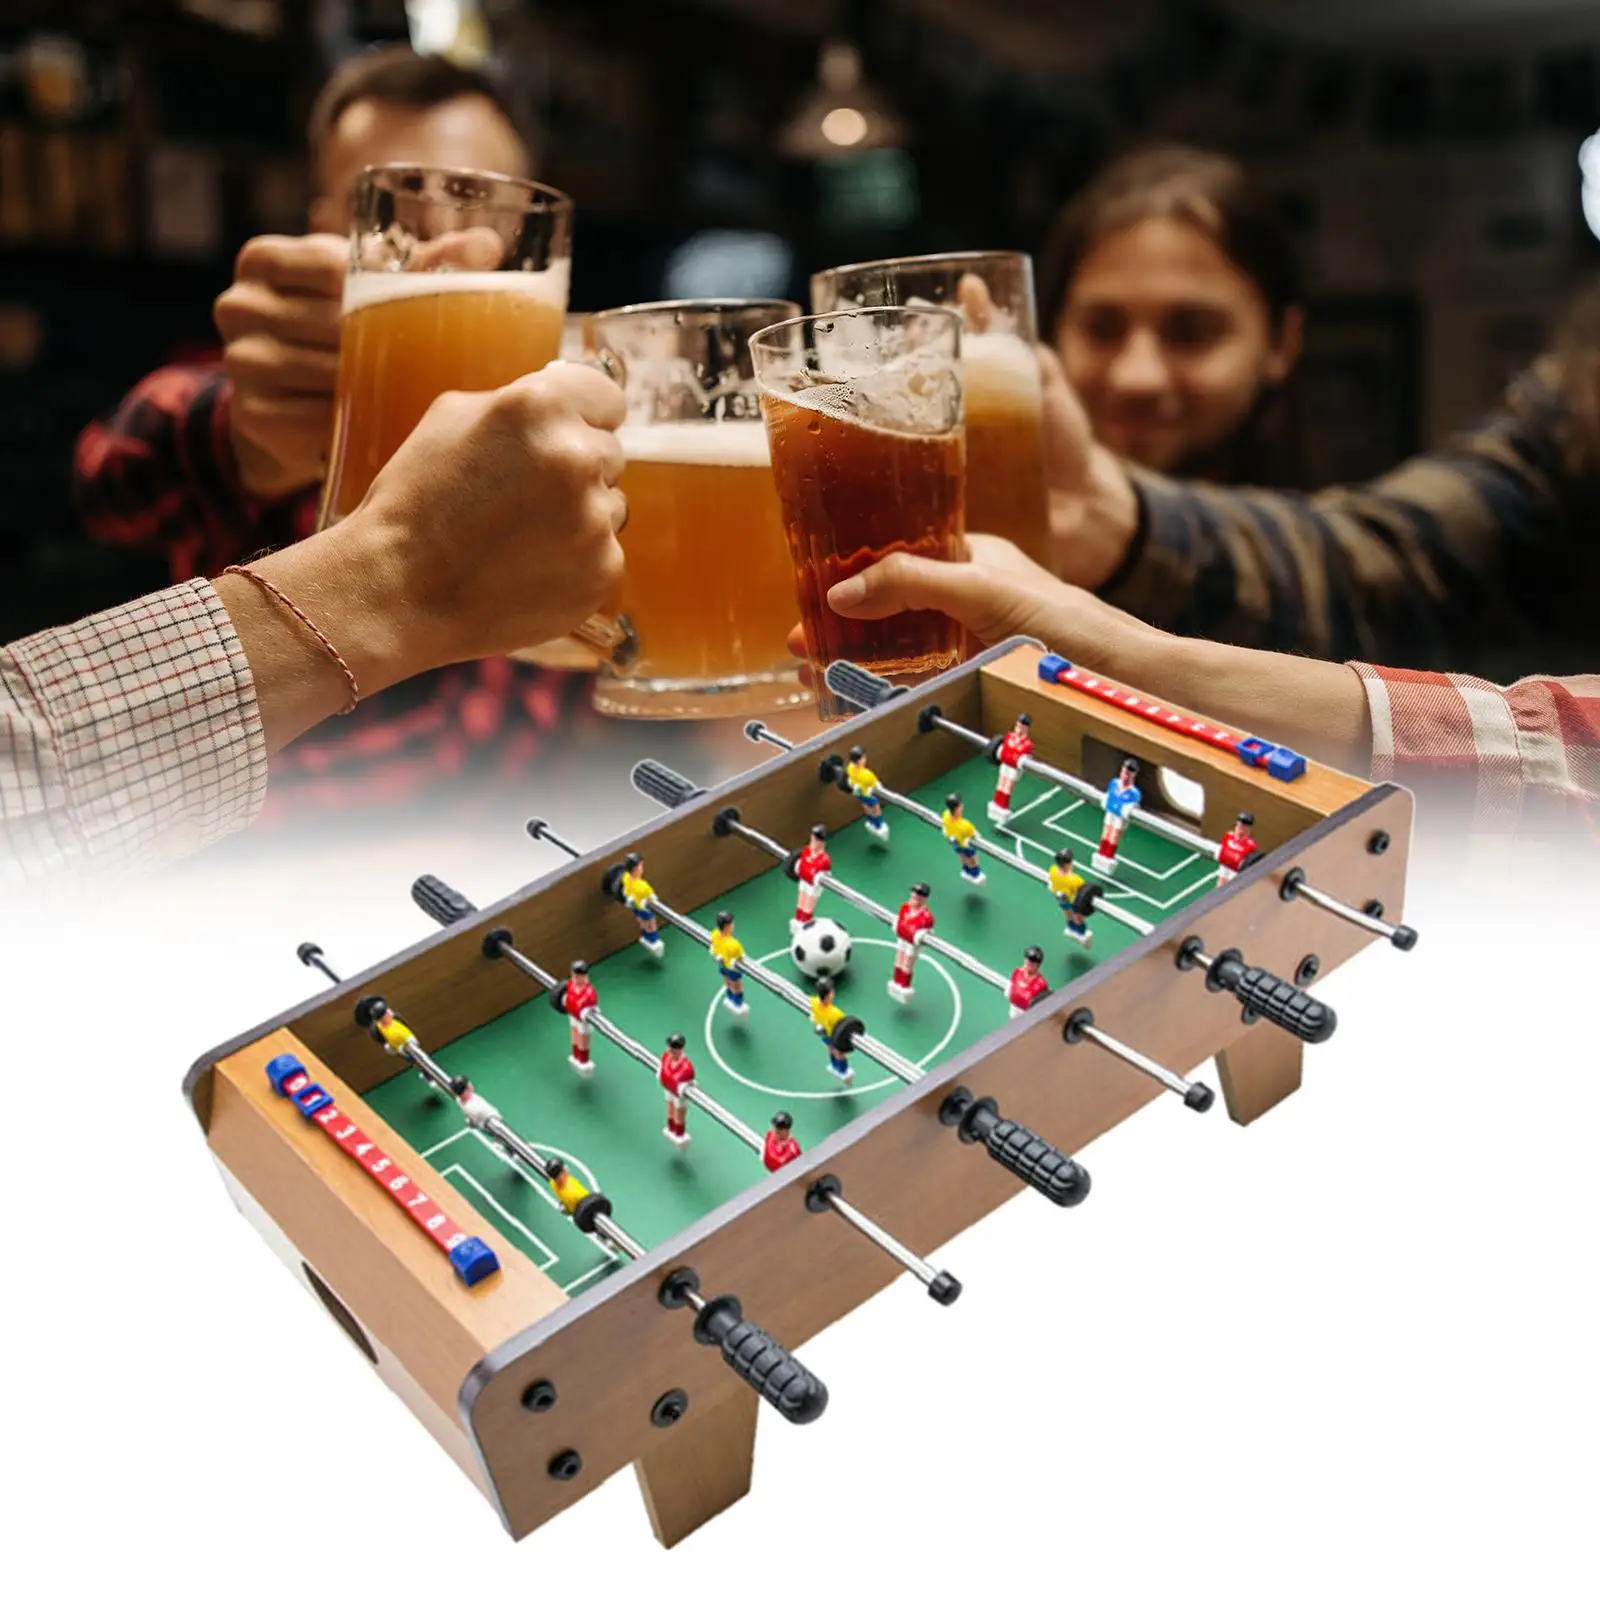 Mini Tabletop Football Game Table Top Soccer Game Desktop Sport Board Intellectual Developmental Party Game for Birthday Gifts